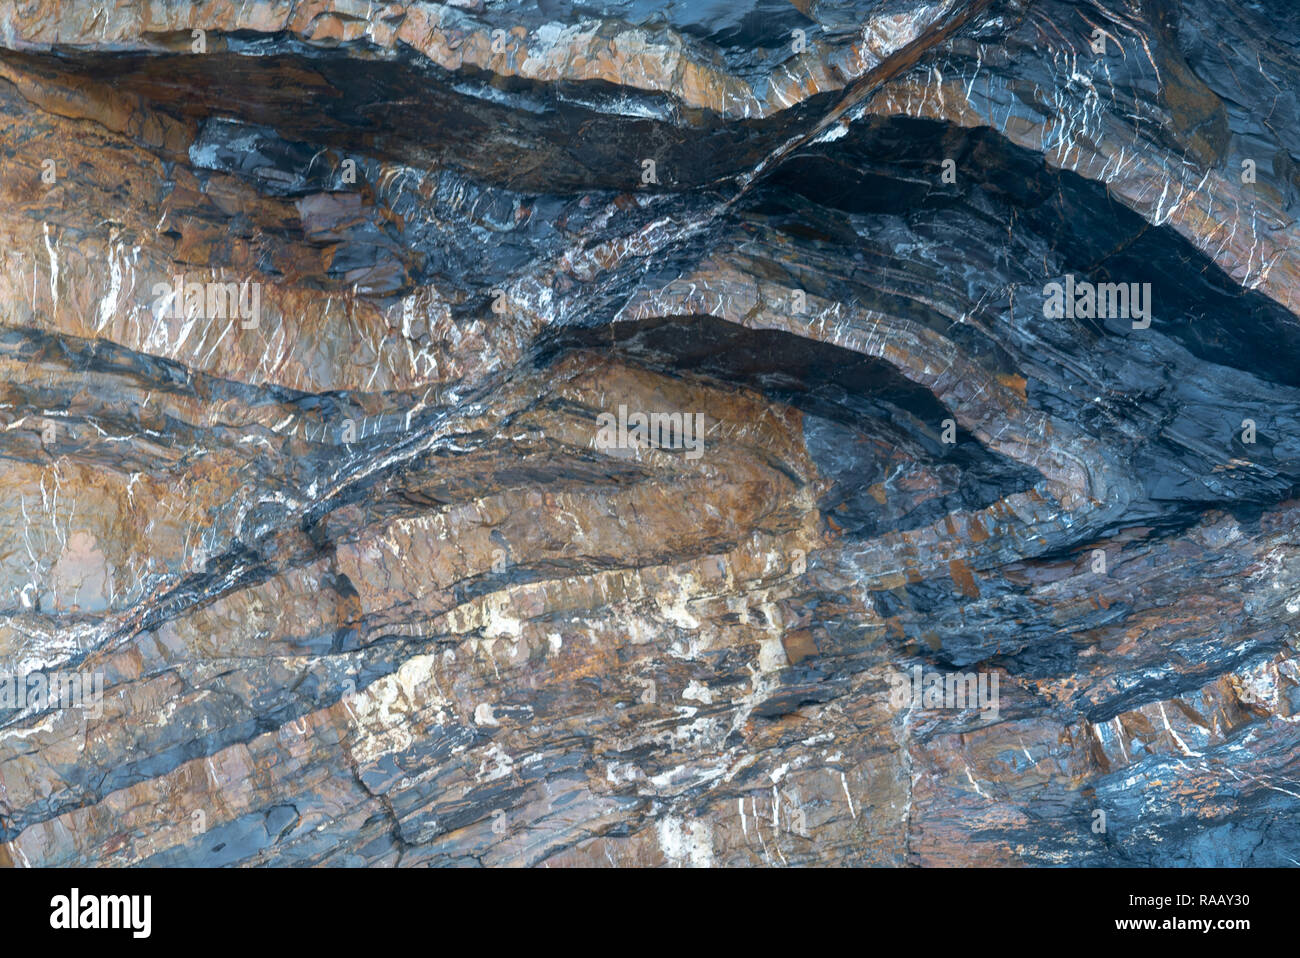 Spectacularly folded sequence of alternating grey shales and sandstones detail [1 of 5], North Cornwall UK Stock Photo